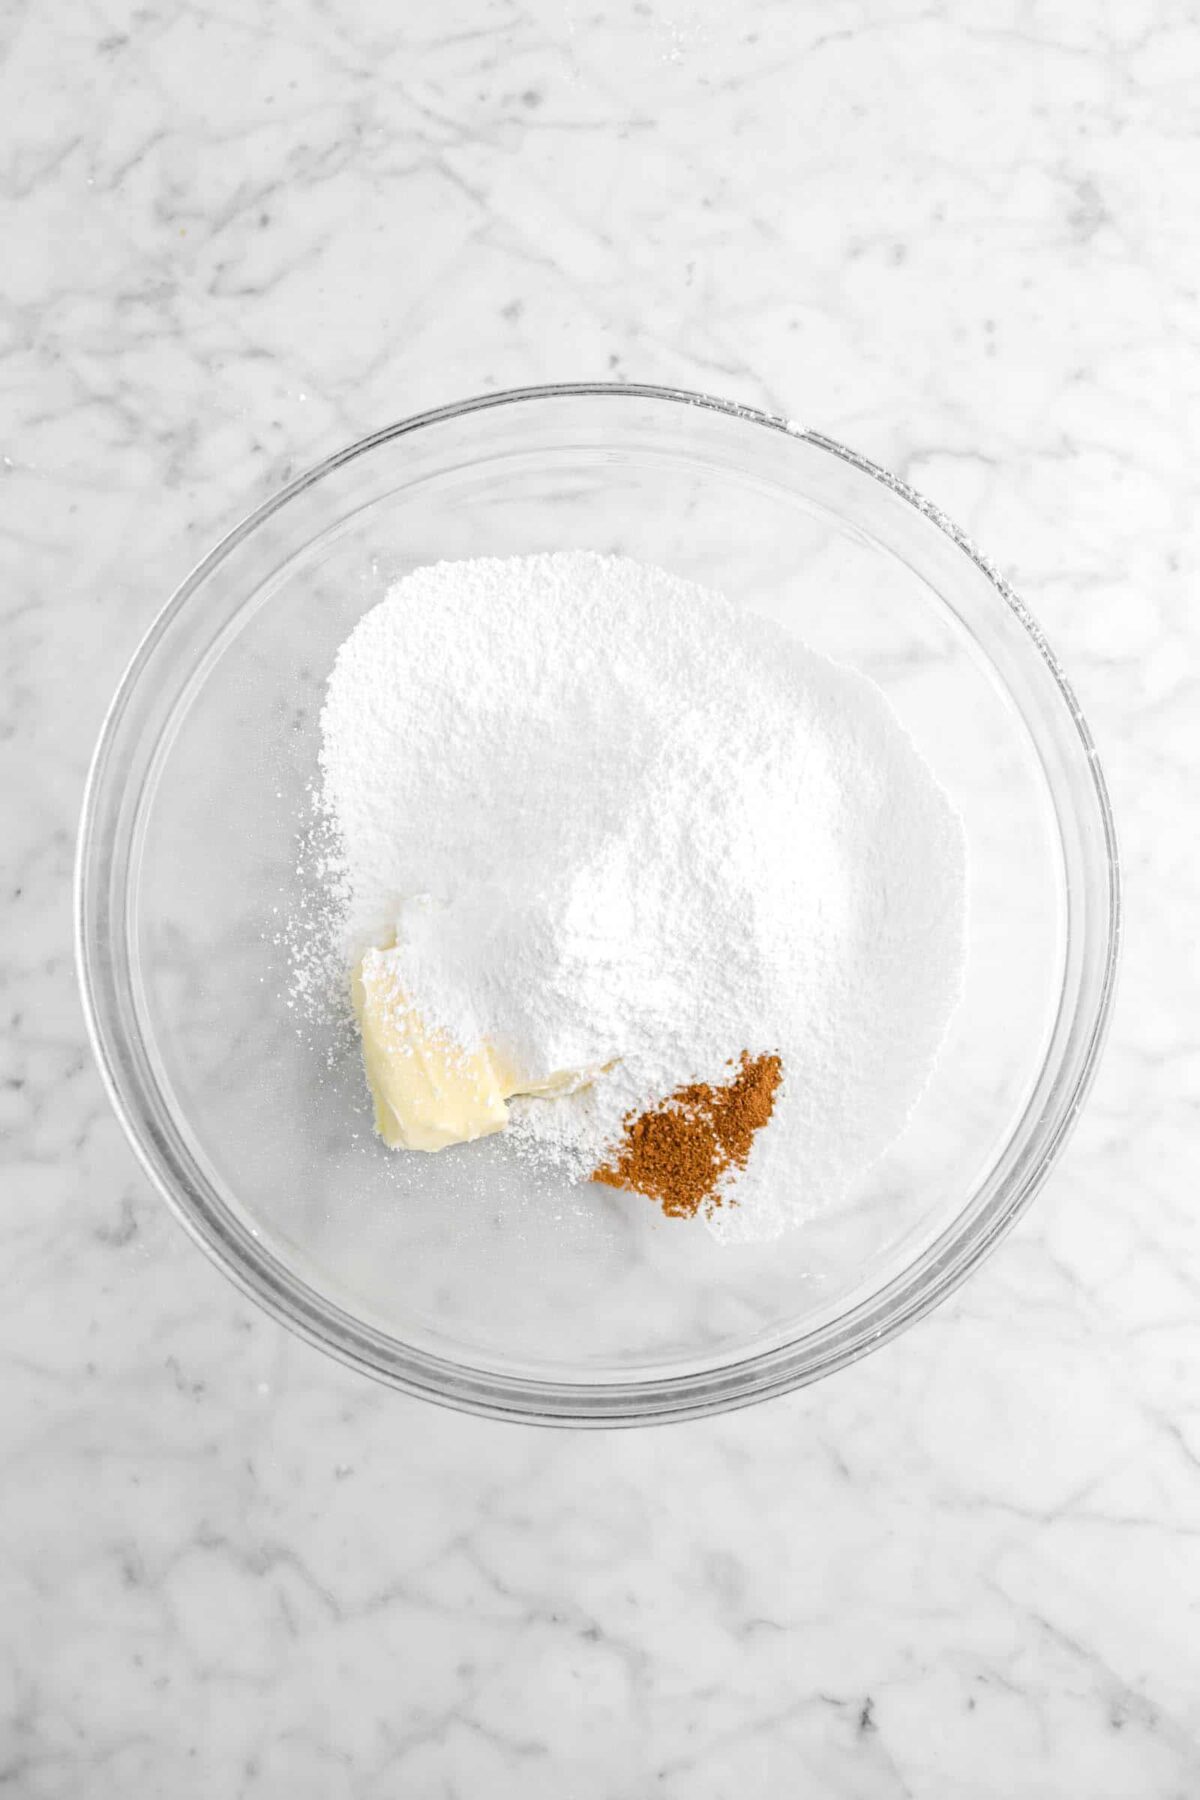 butter, powdered sugar, and gingerbread spice in glass bowl